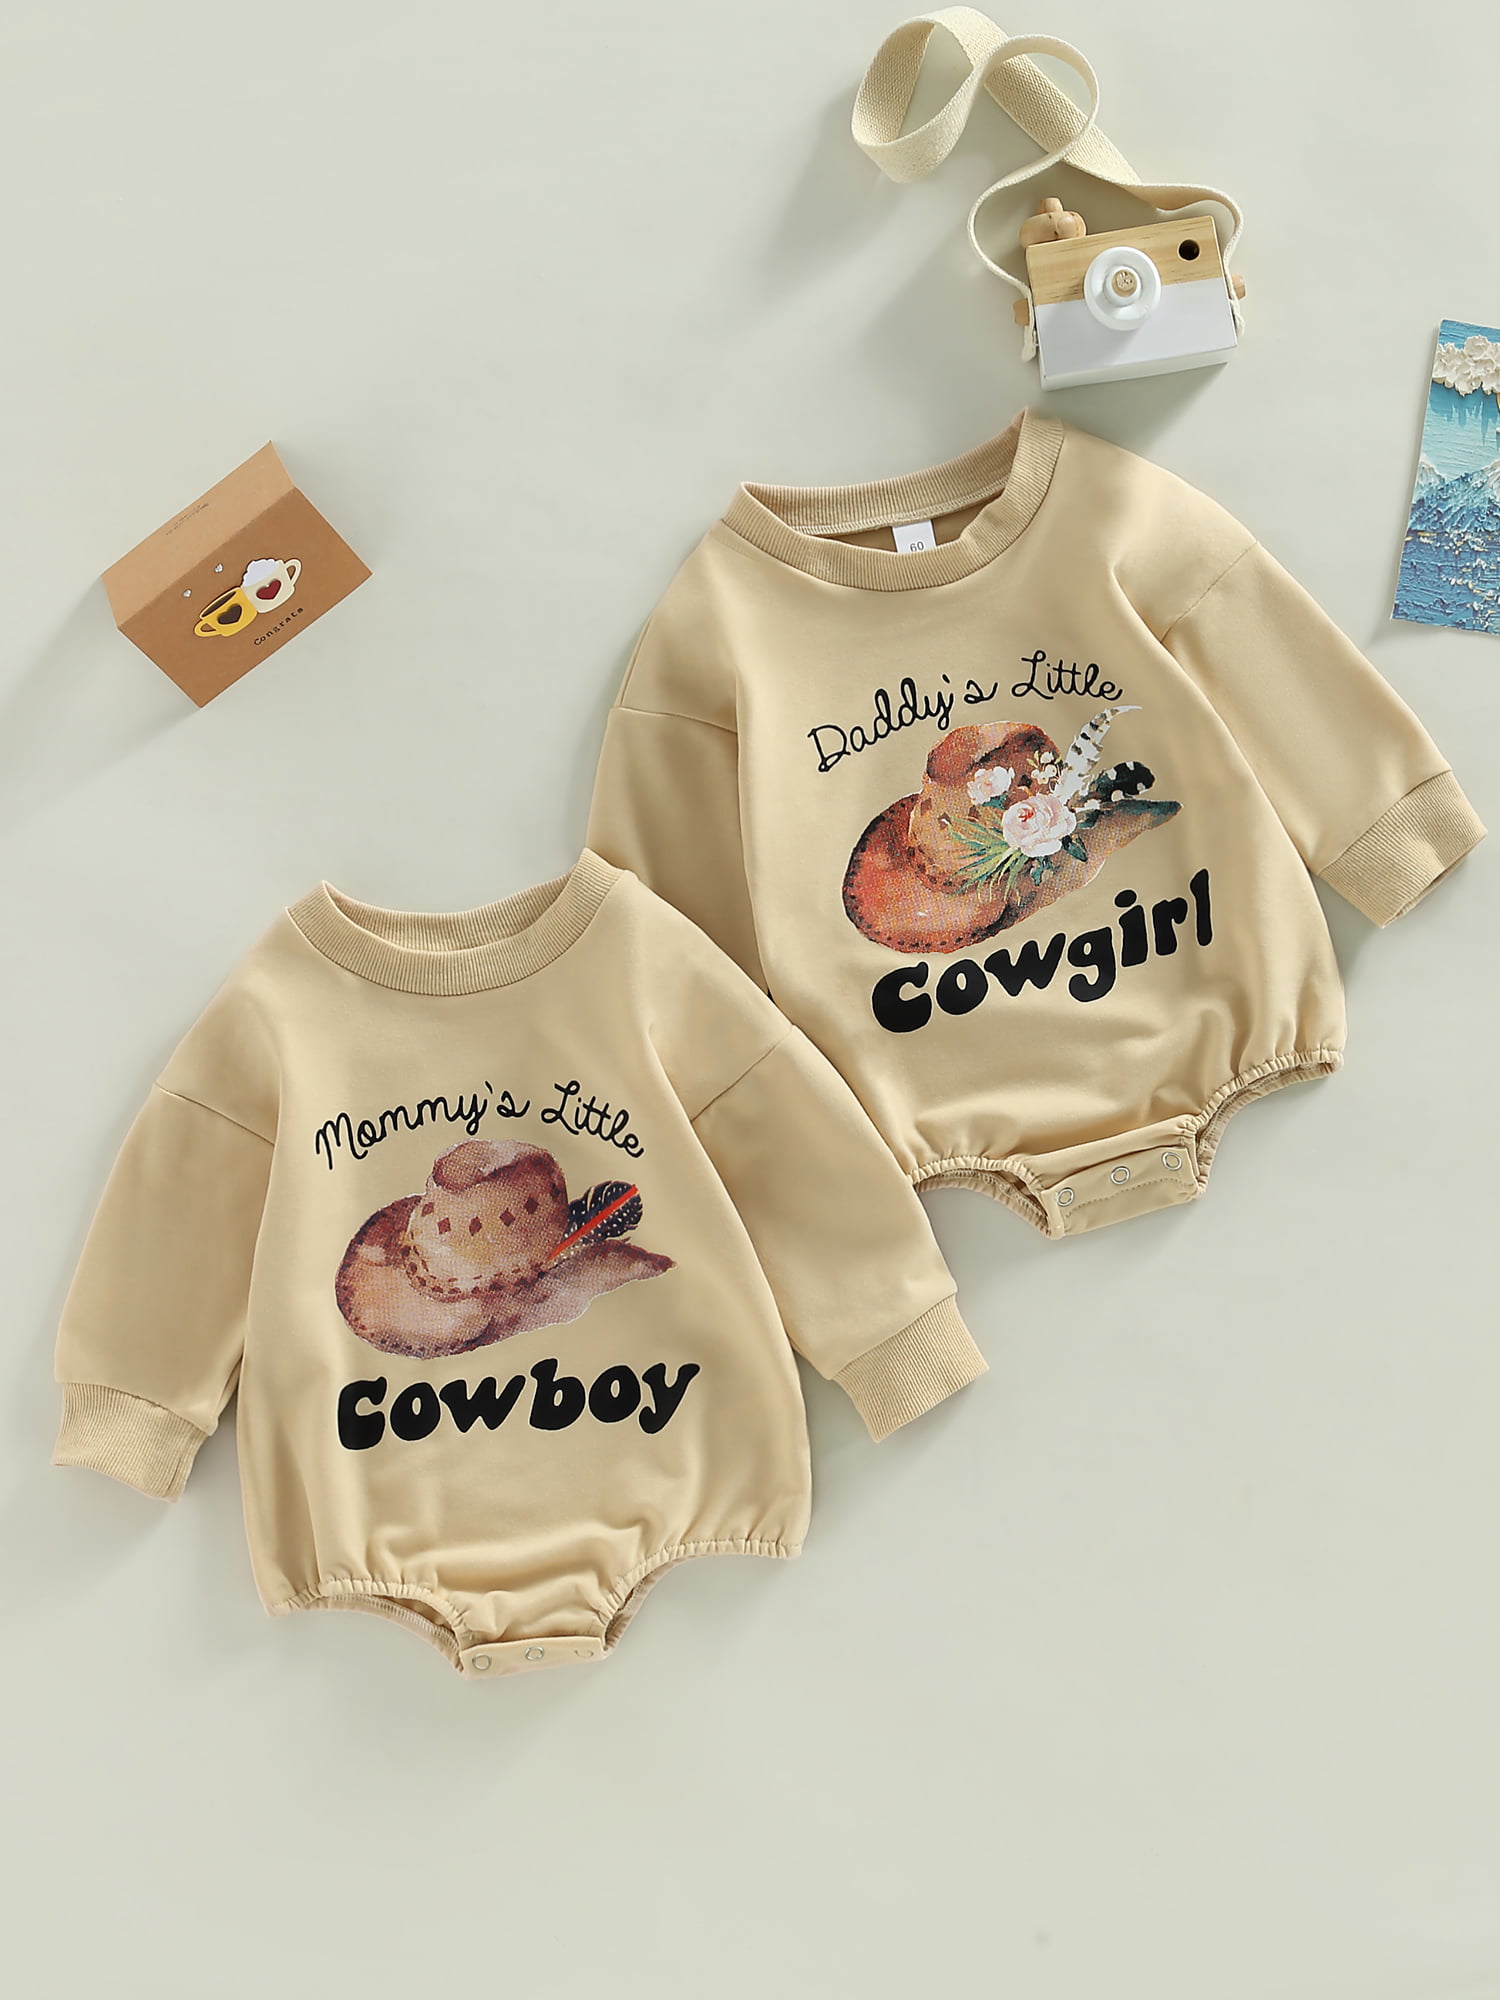 Western Baby Girl Boy Clothes Sweatshirt Romper Cow Printed Bodysuit Long  Sleeve Onesie Newborn Fall Winter Outfits (Country Baby Cowgirl, 0-3  Months) 